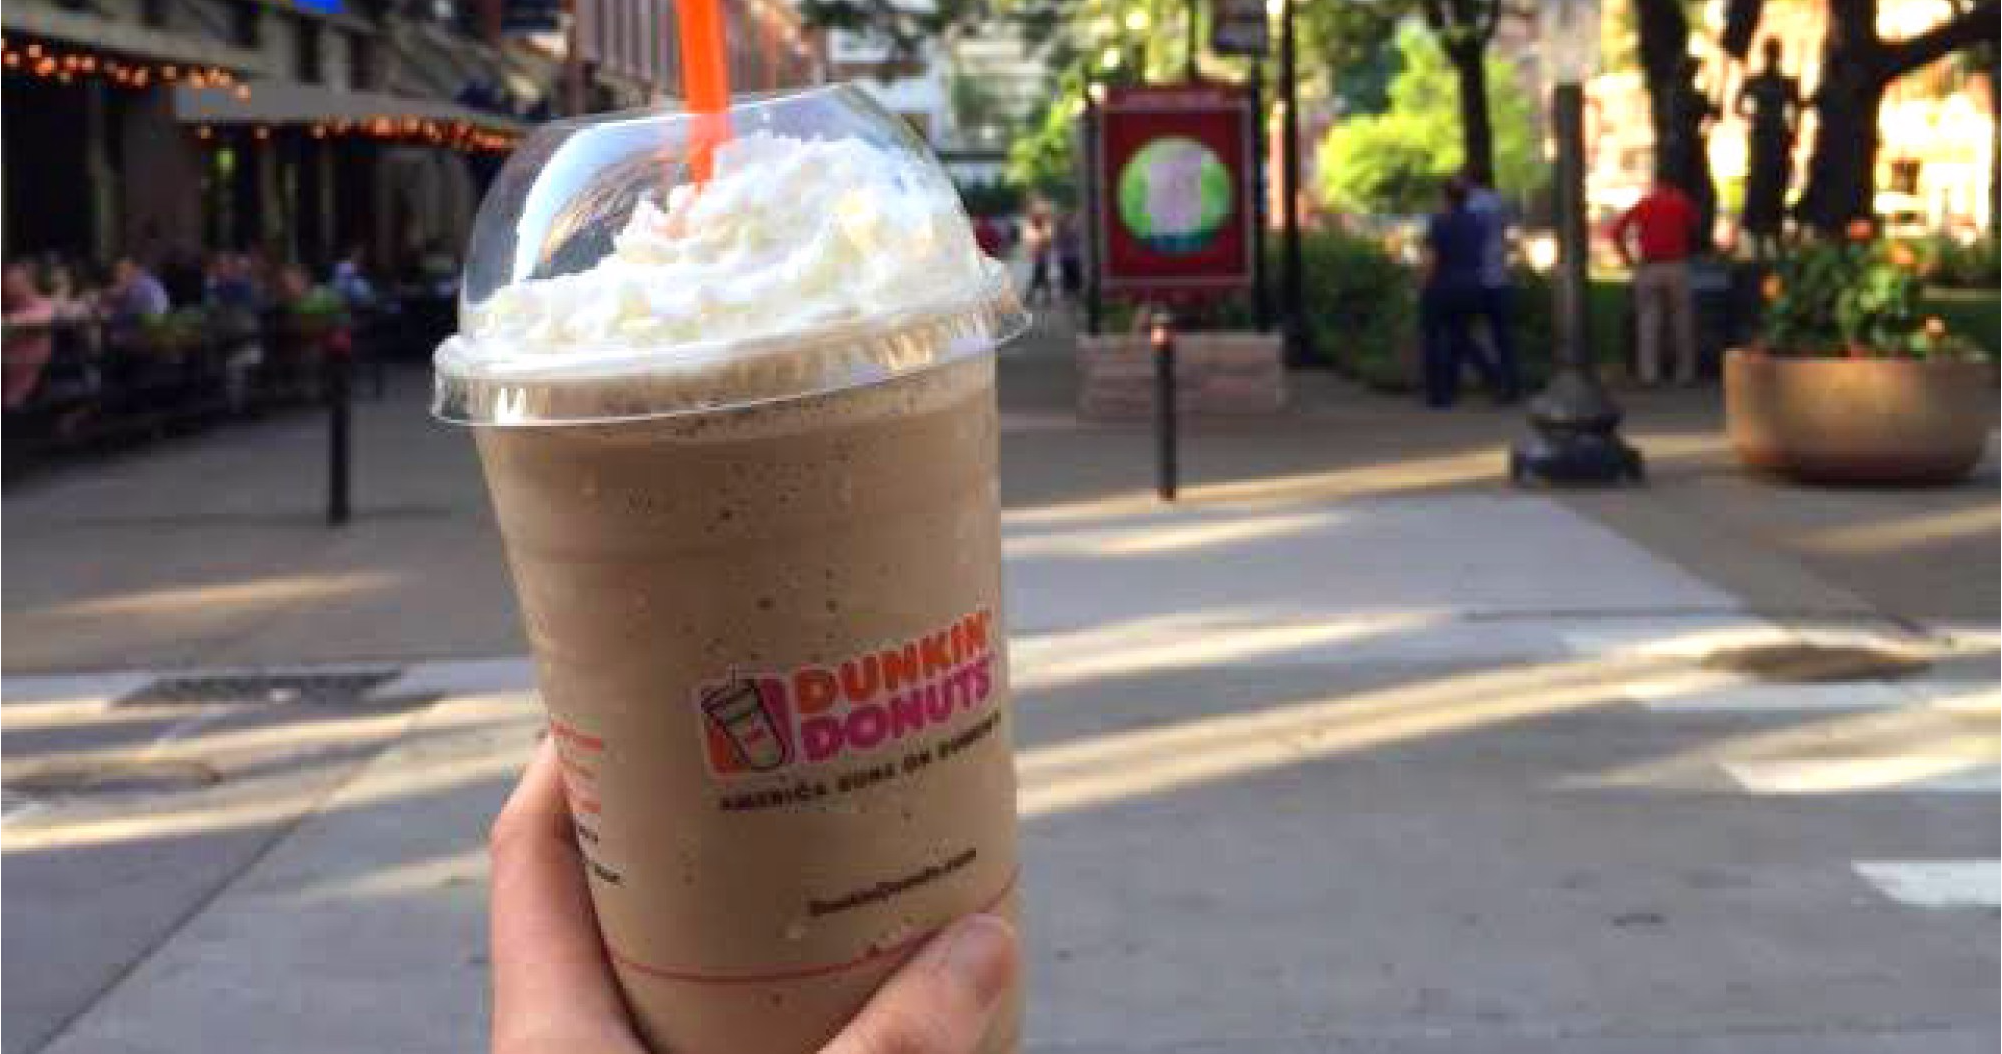 Keep Your Eye Out Dunkin' Donuts Is Giving Away Free